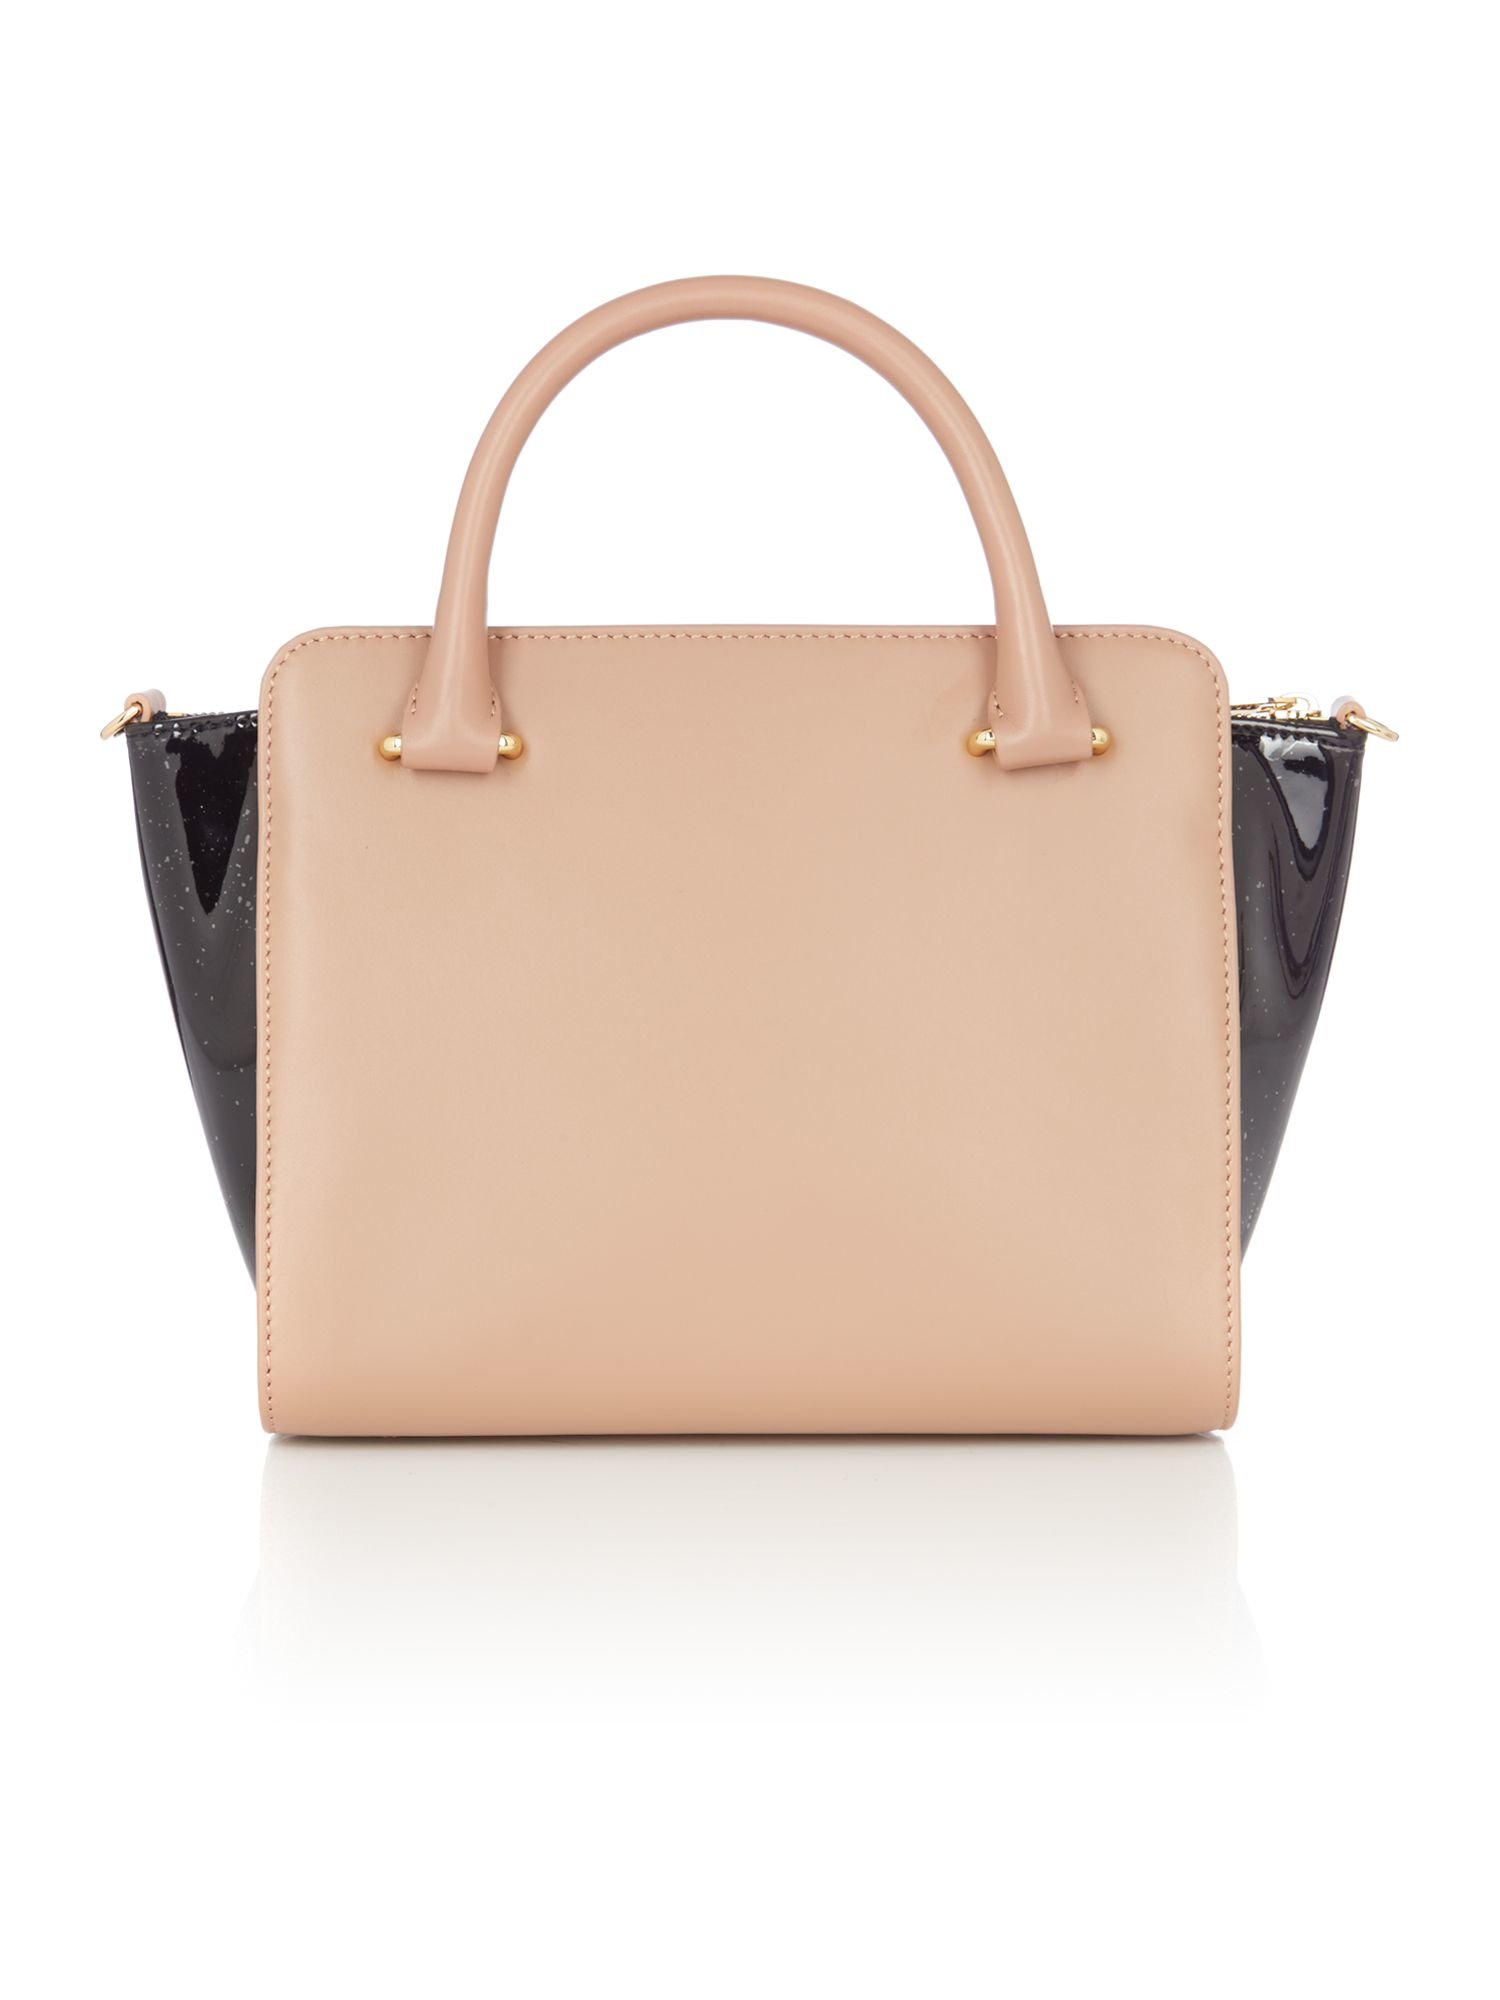 Ted baker Ashlene Taupe Bow Tote Bag in Brown | Lyst